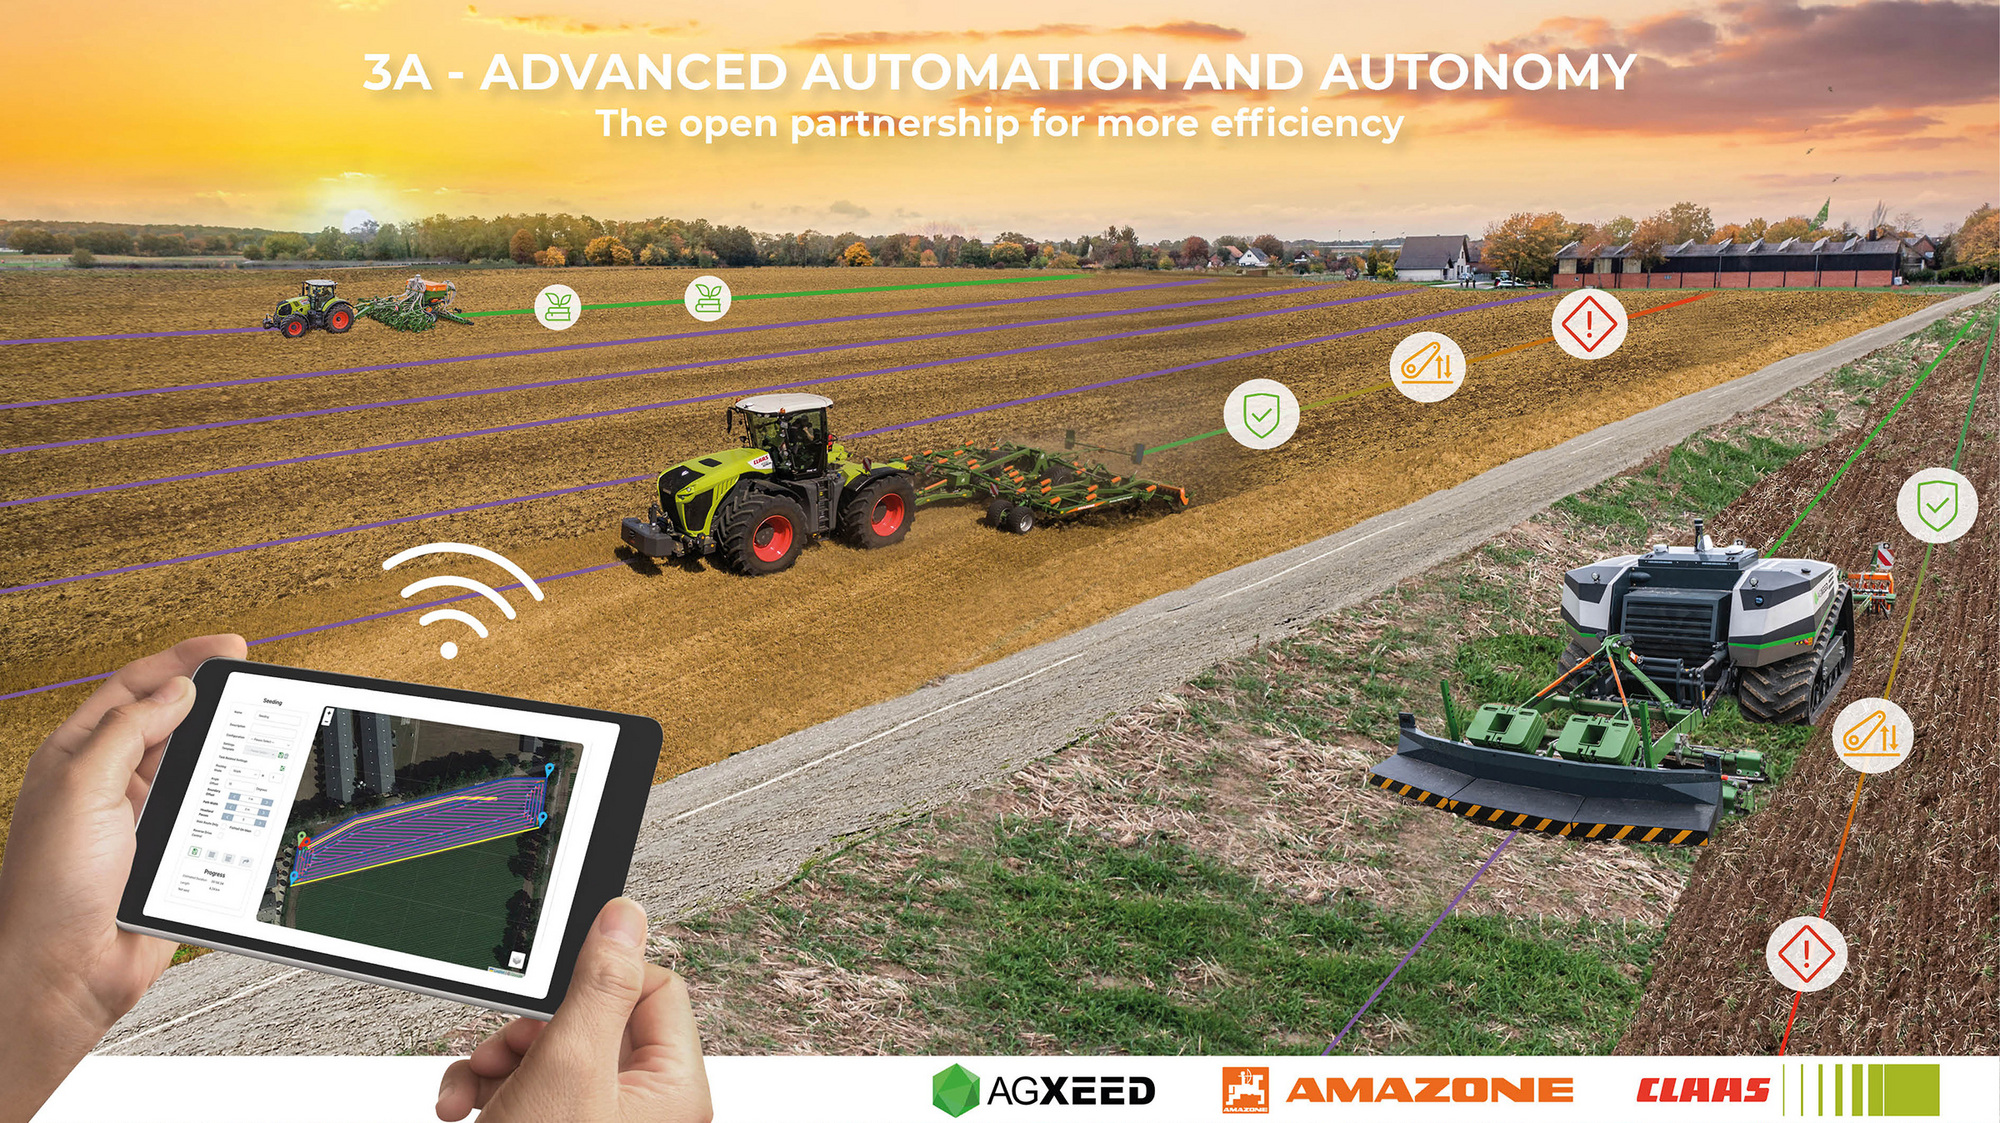 csm_Claas_Amzon3A_Automation_and_Aut2400pxweb_f6b5fd9022